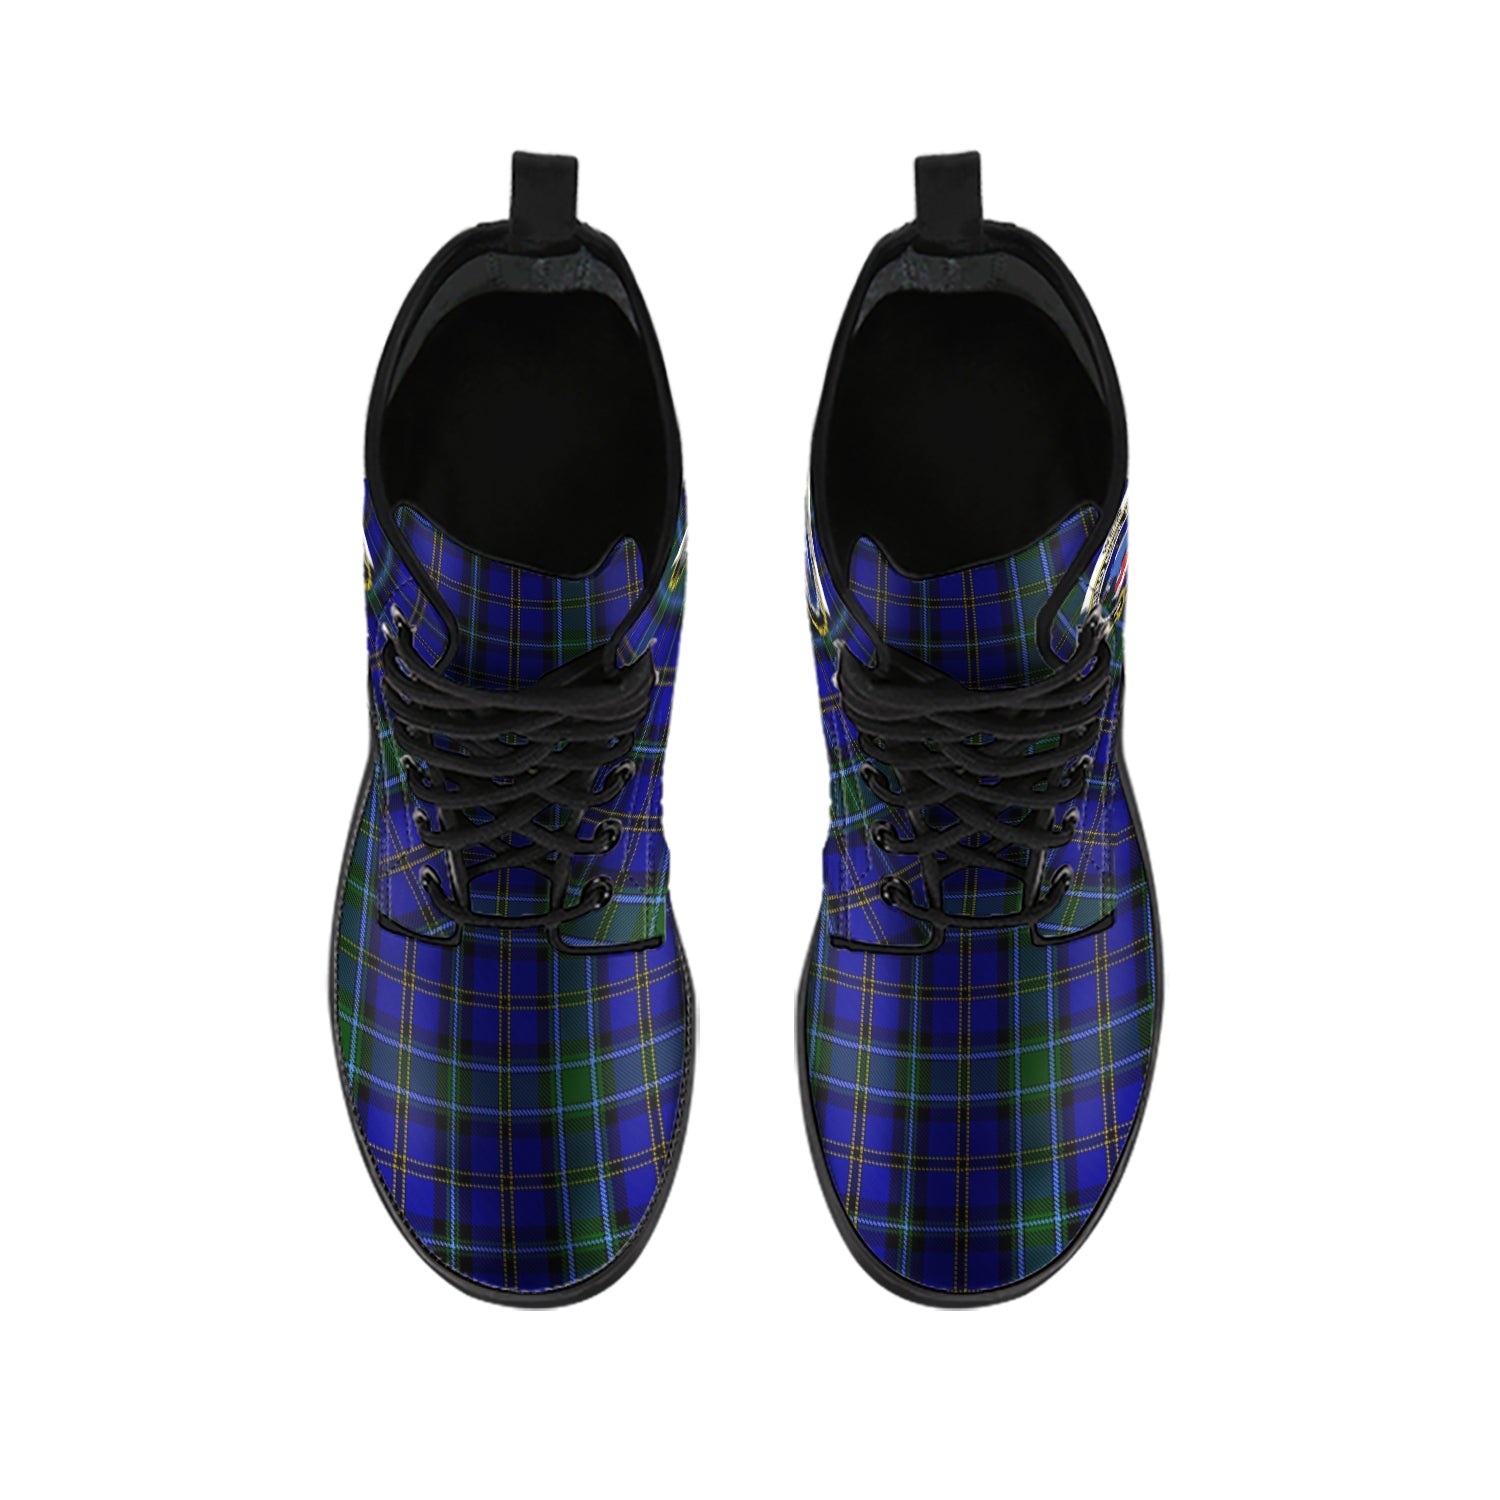 weir-tartan-leather-boots-with-family-crest